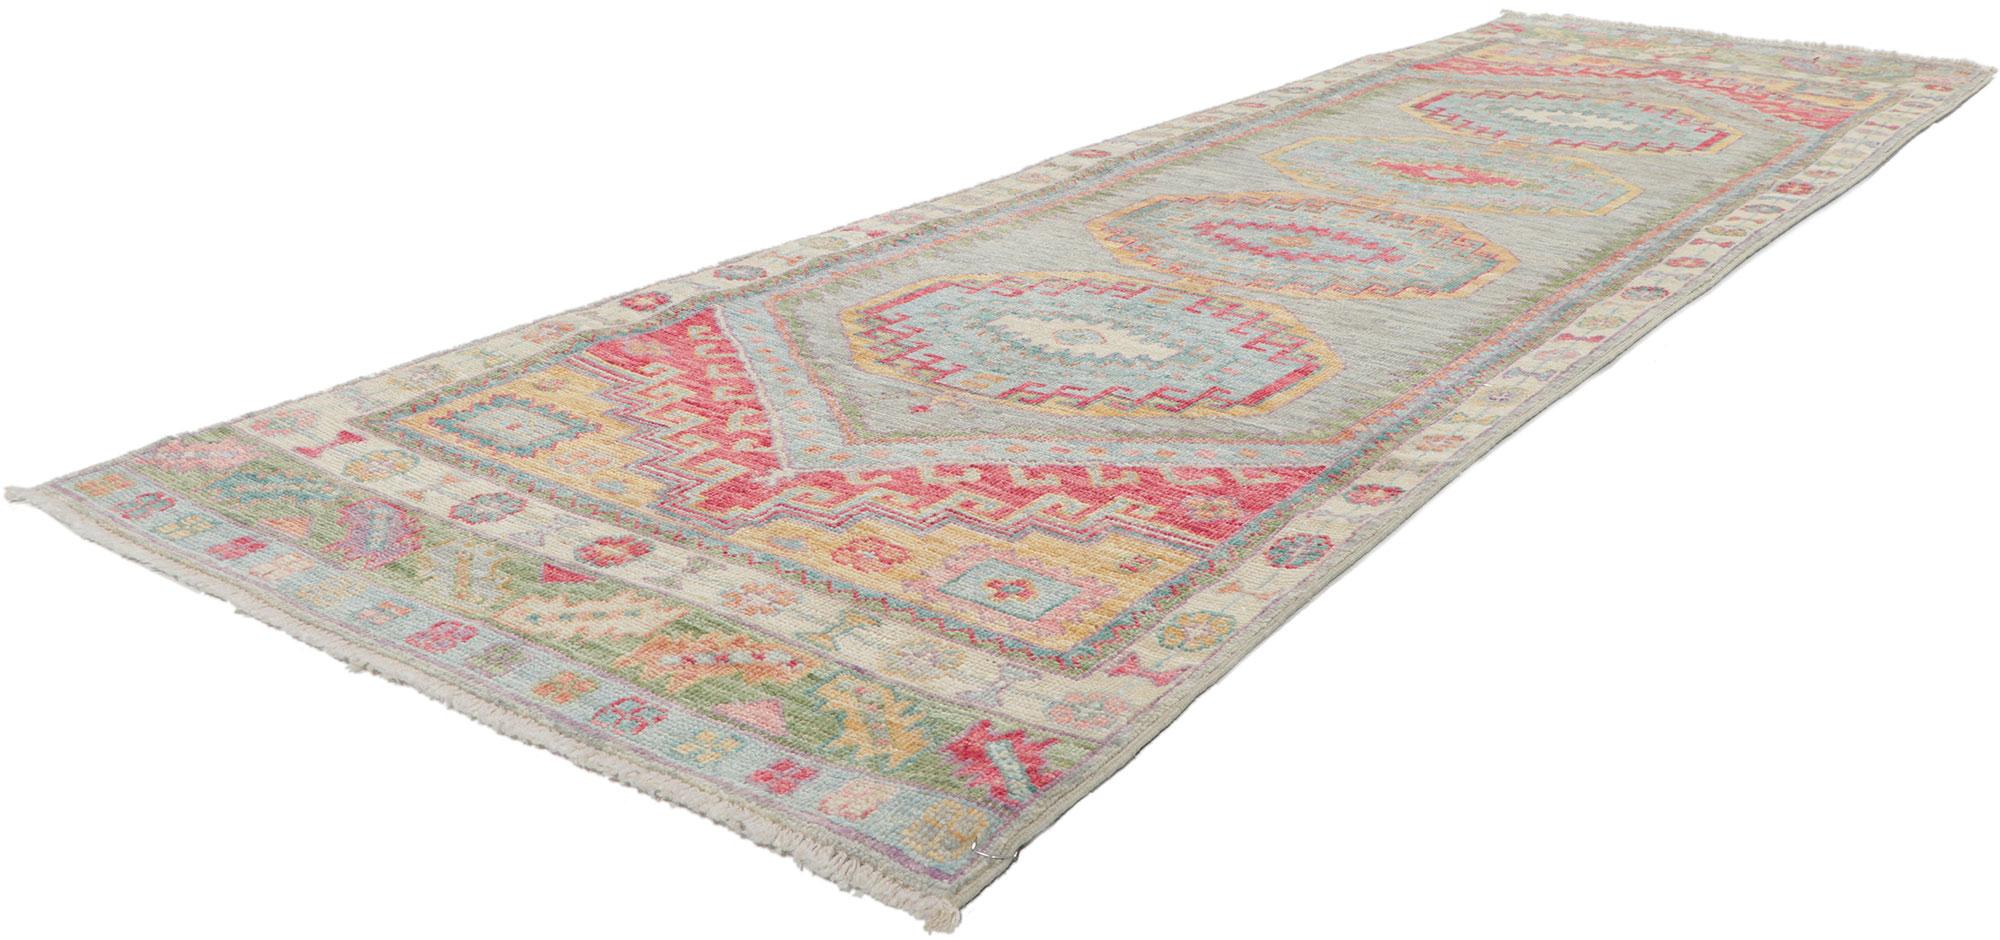 80969 New Colorful Oushak Runner 02'10 x 09'04.
​Polished and playful with a hint of nomadic charm, this hand-knotted wool contemporary Oushak runner beautifully embodies a modern style. The abrashed field features hooked medallions decorated with